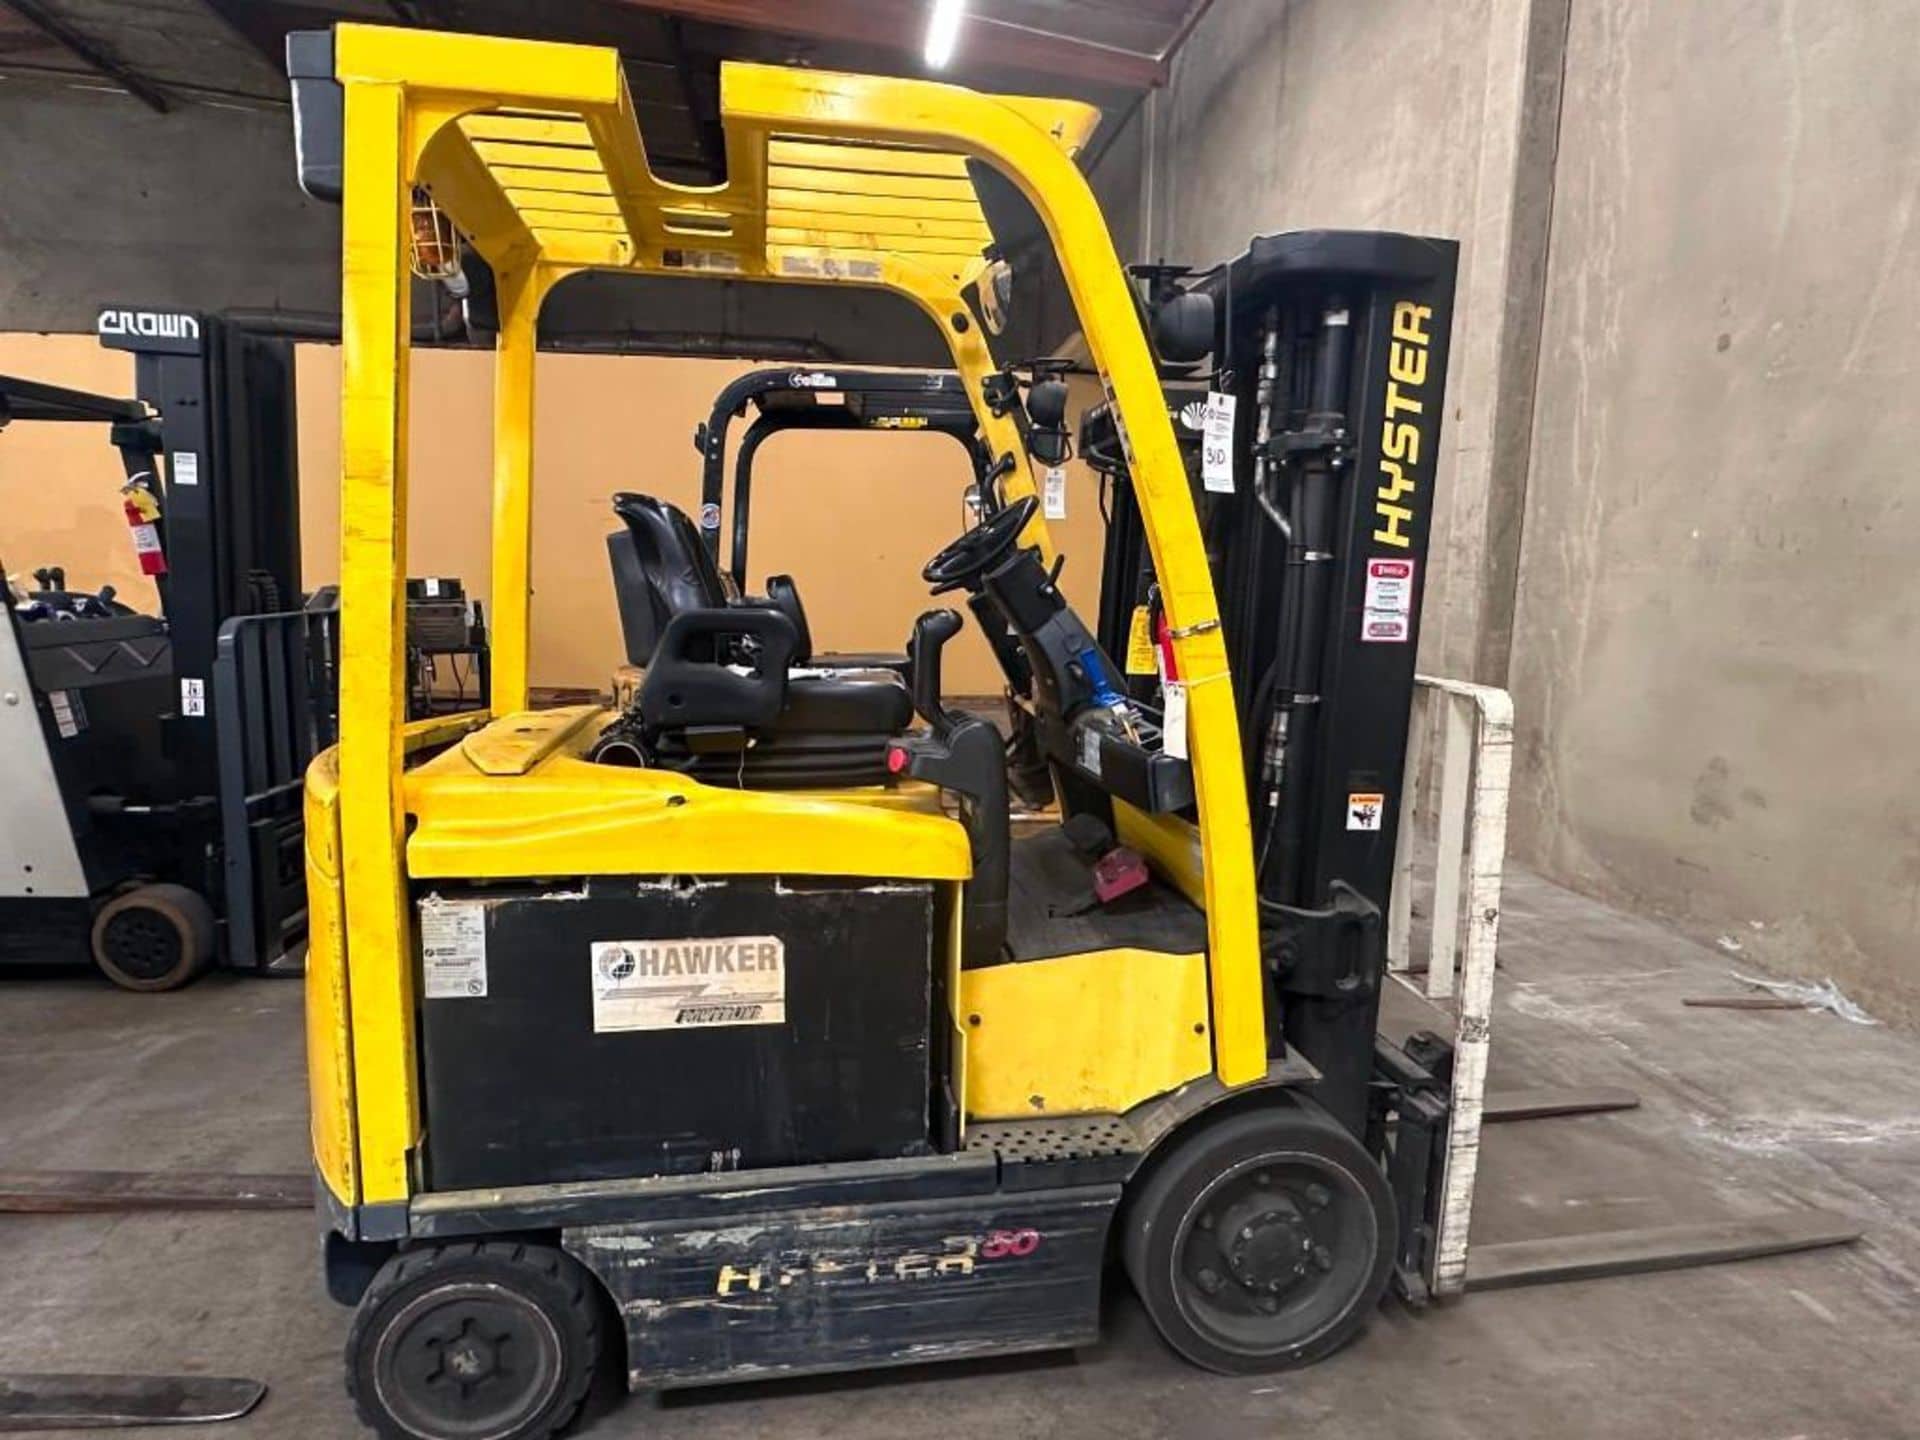 5000 pound hyster e50xn33 electric forklift for sale